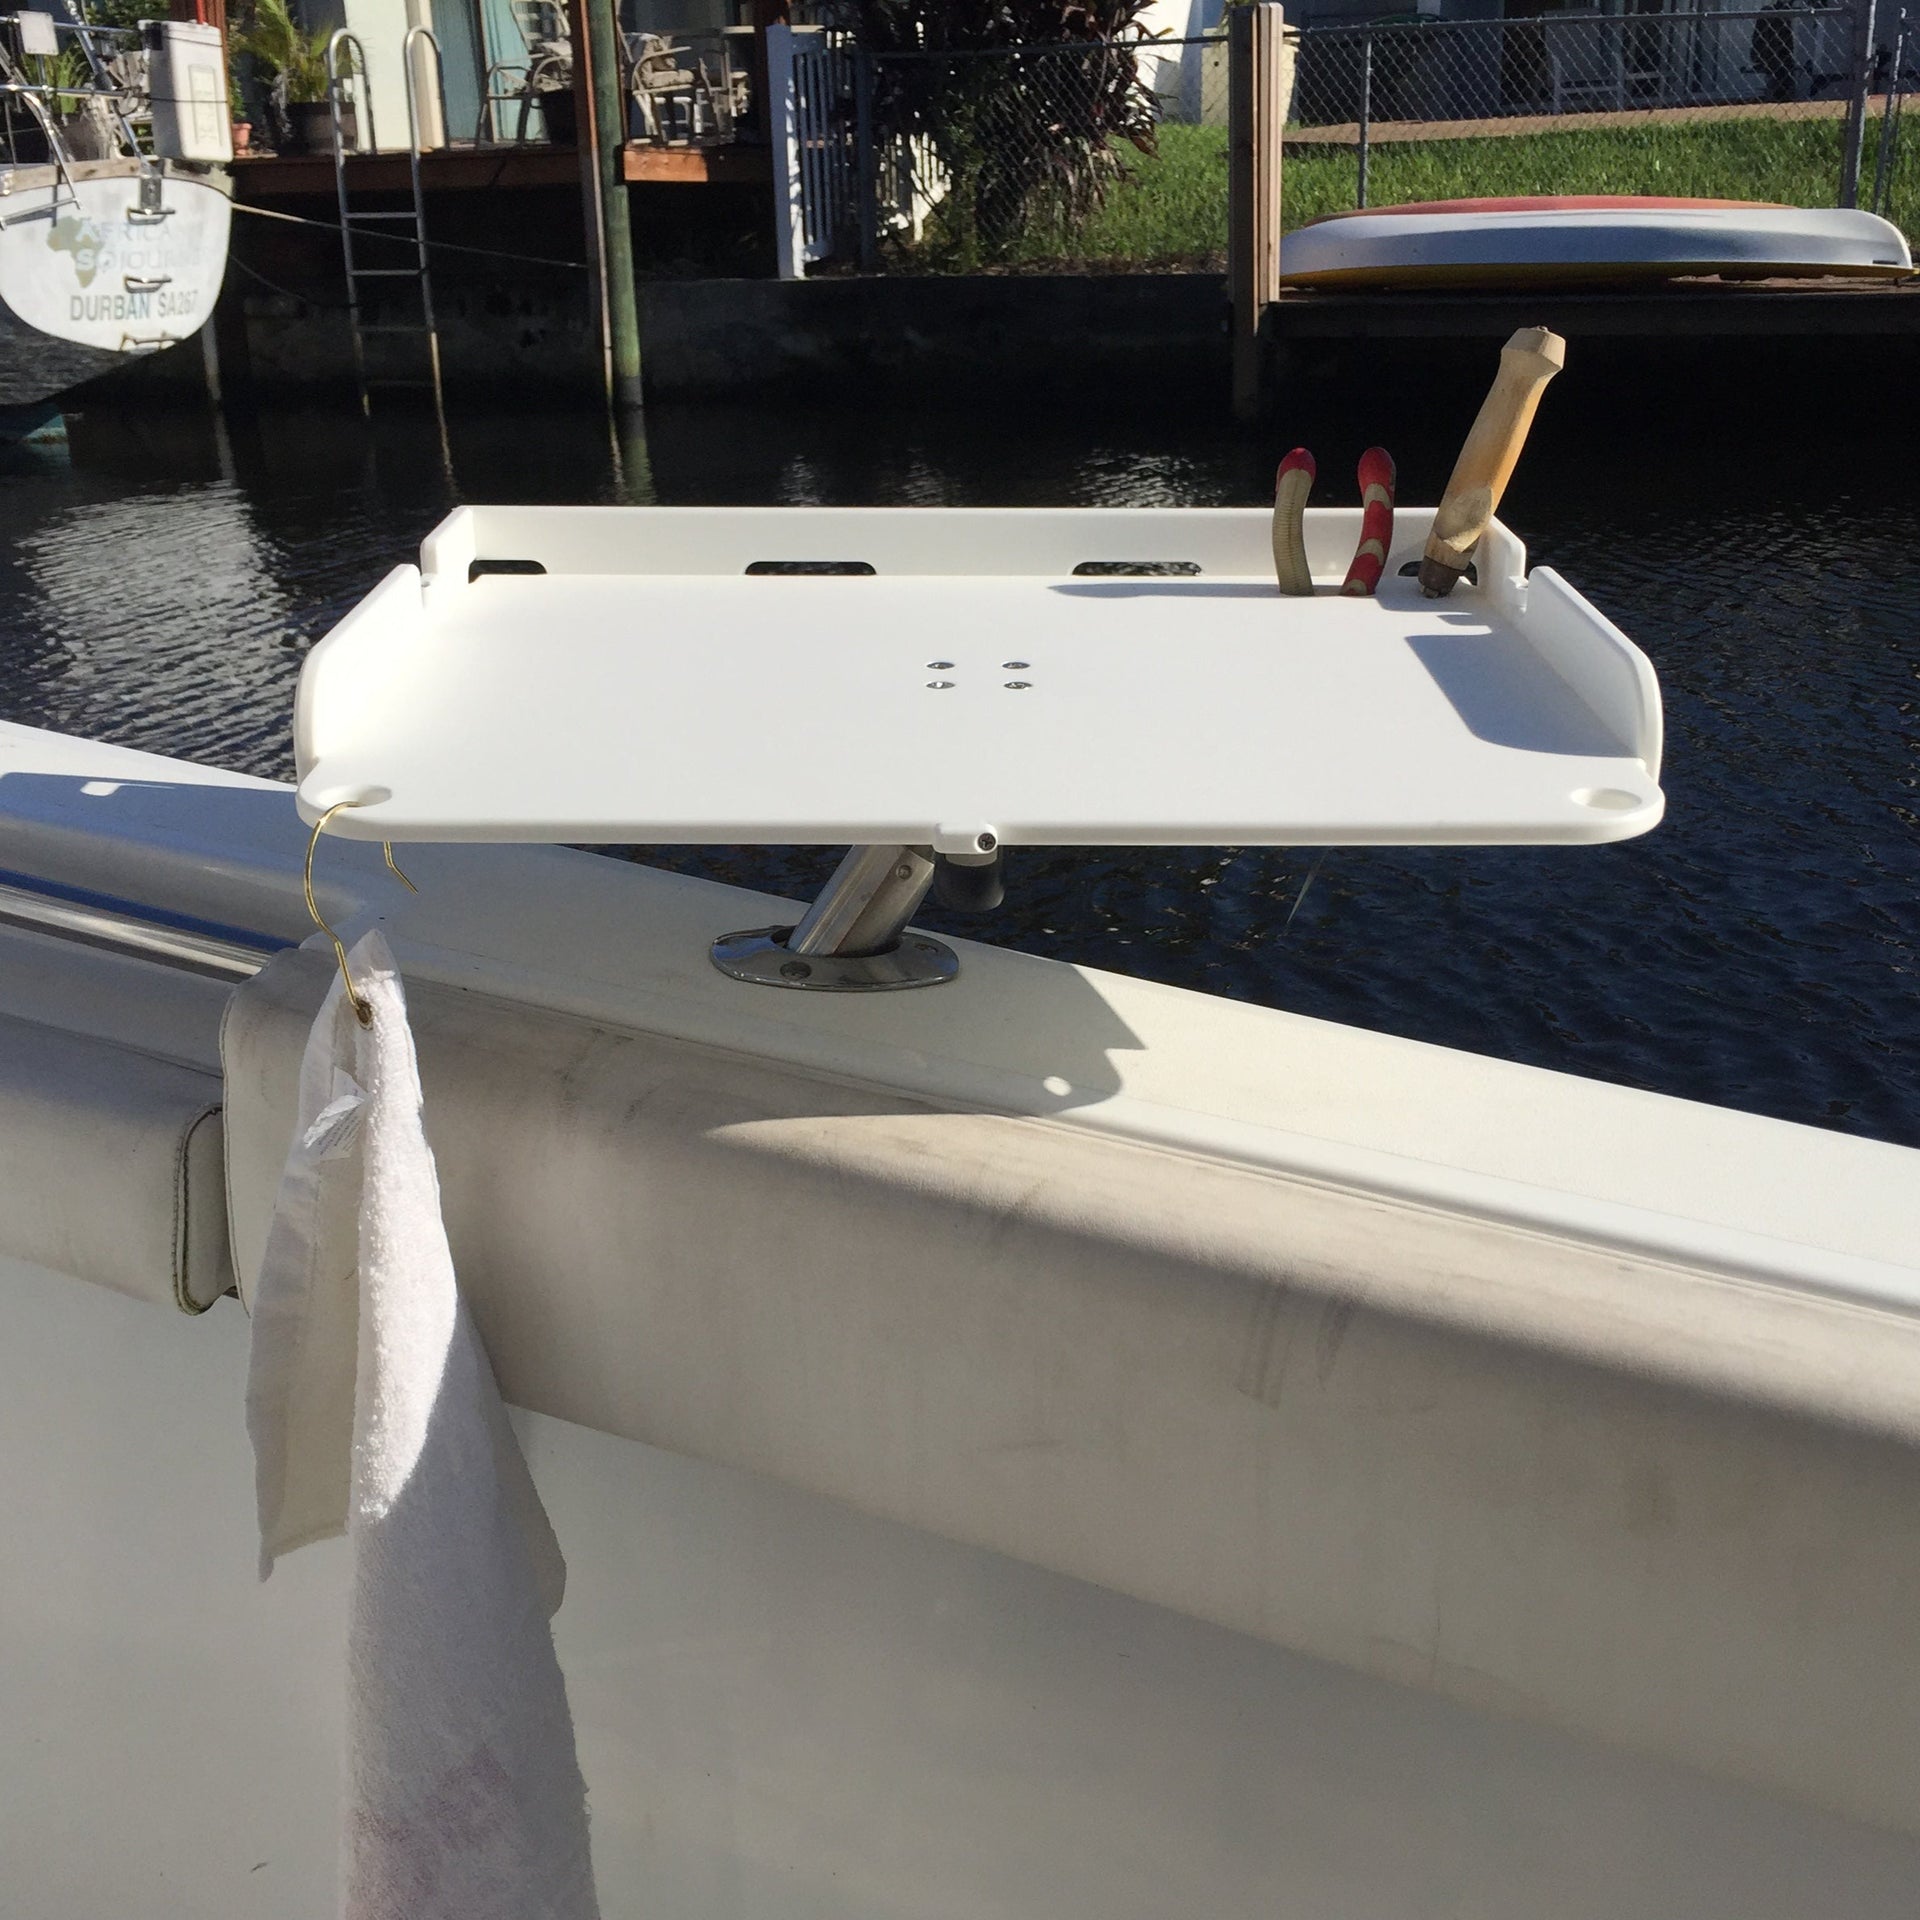 Docktail Boat Utility Table With Cup Holders & Magma Rod Holder Mount -  Multiple Colors Available